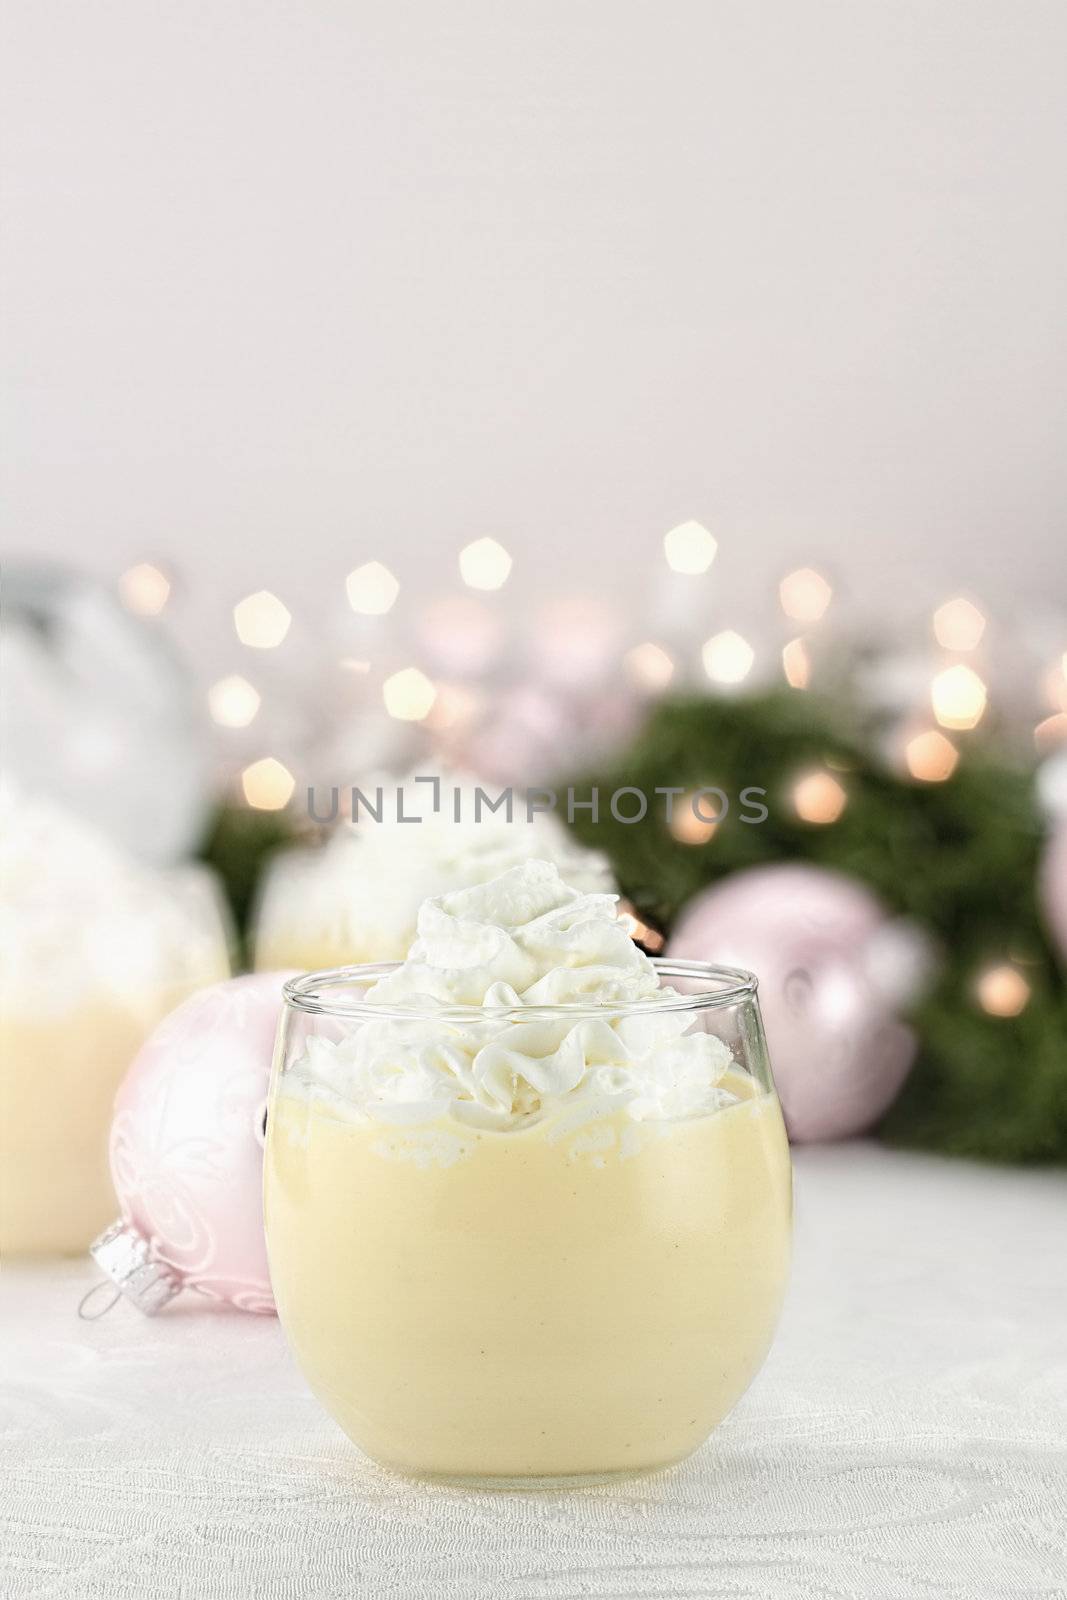 Eggnog with Christmas decor in the background. Shallow depth of field with selective focus on glass in foreground.